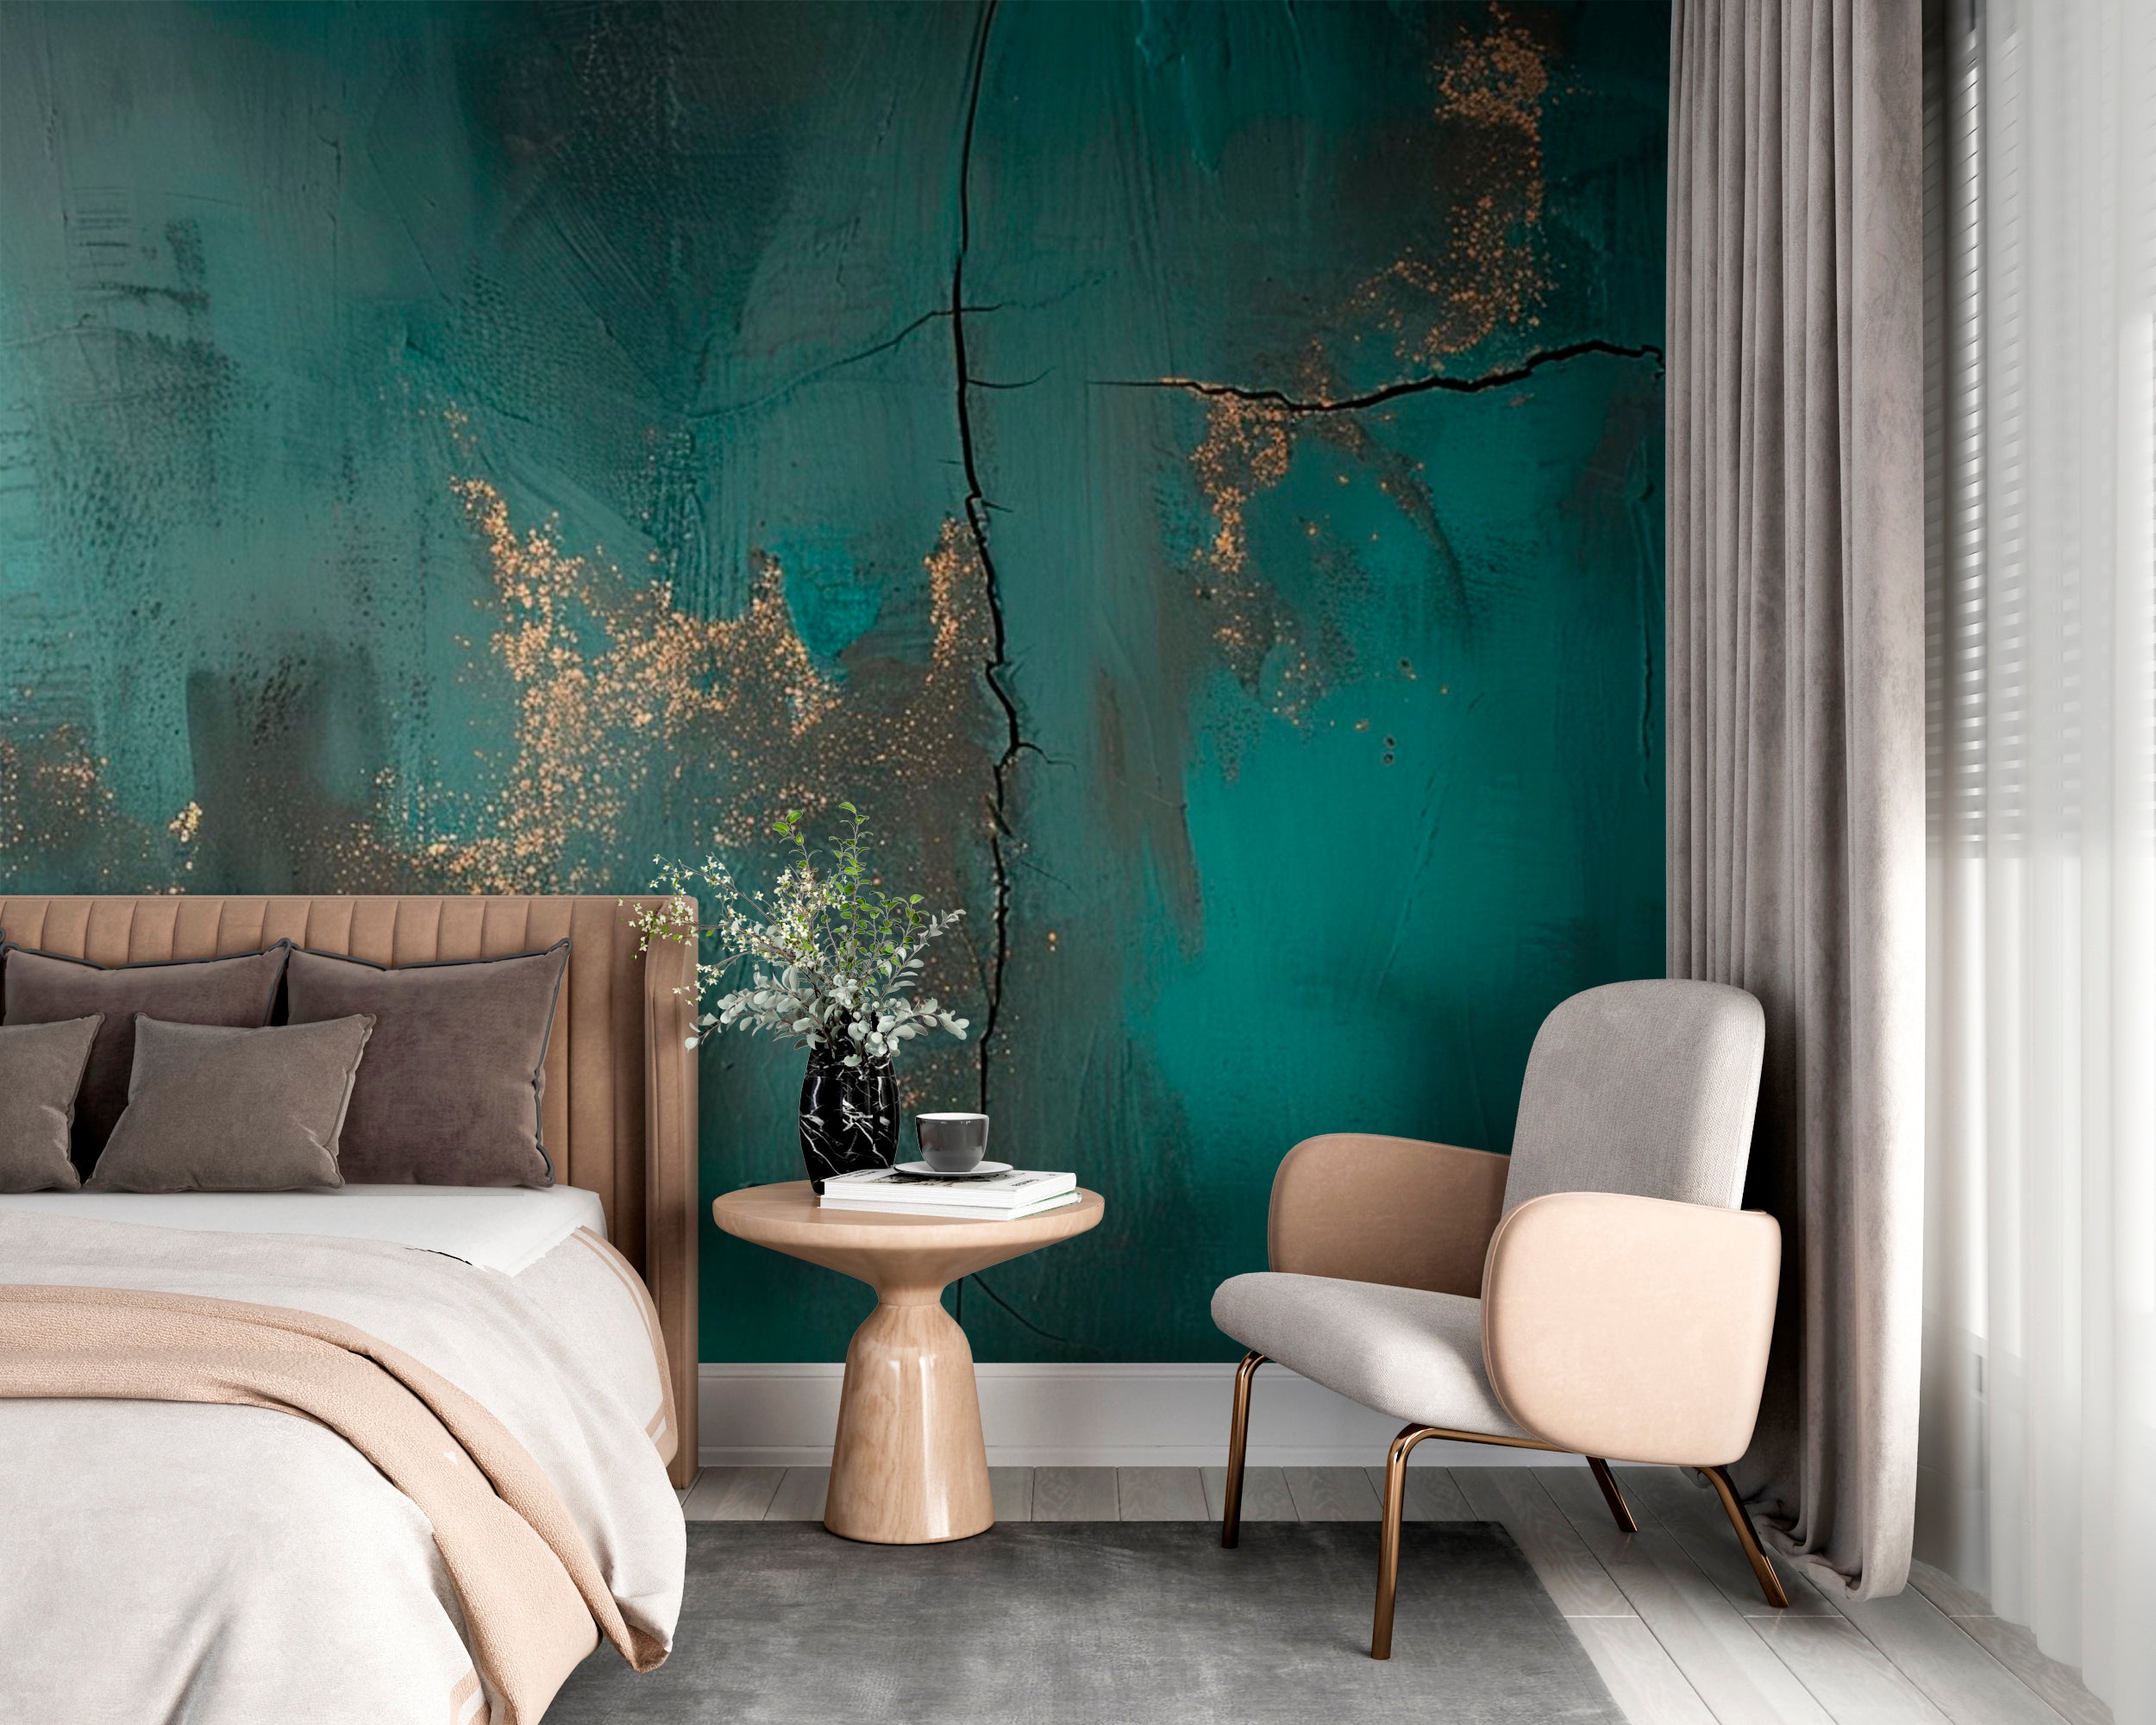 Raw Elegance: Cracked and Gold Effect Wall Decoration